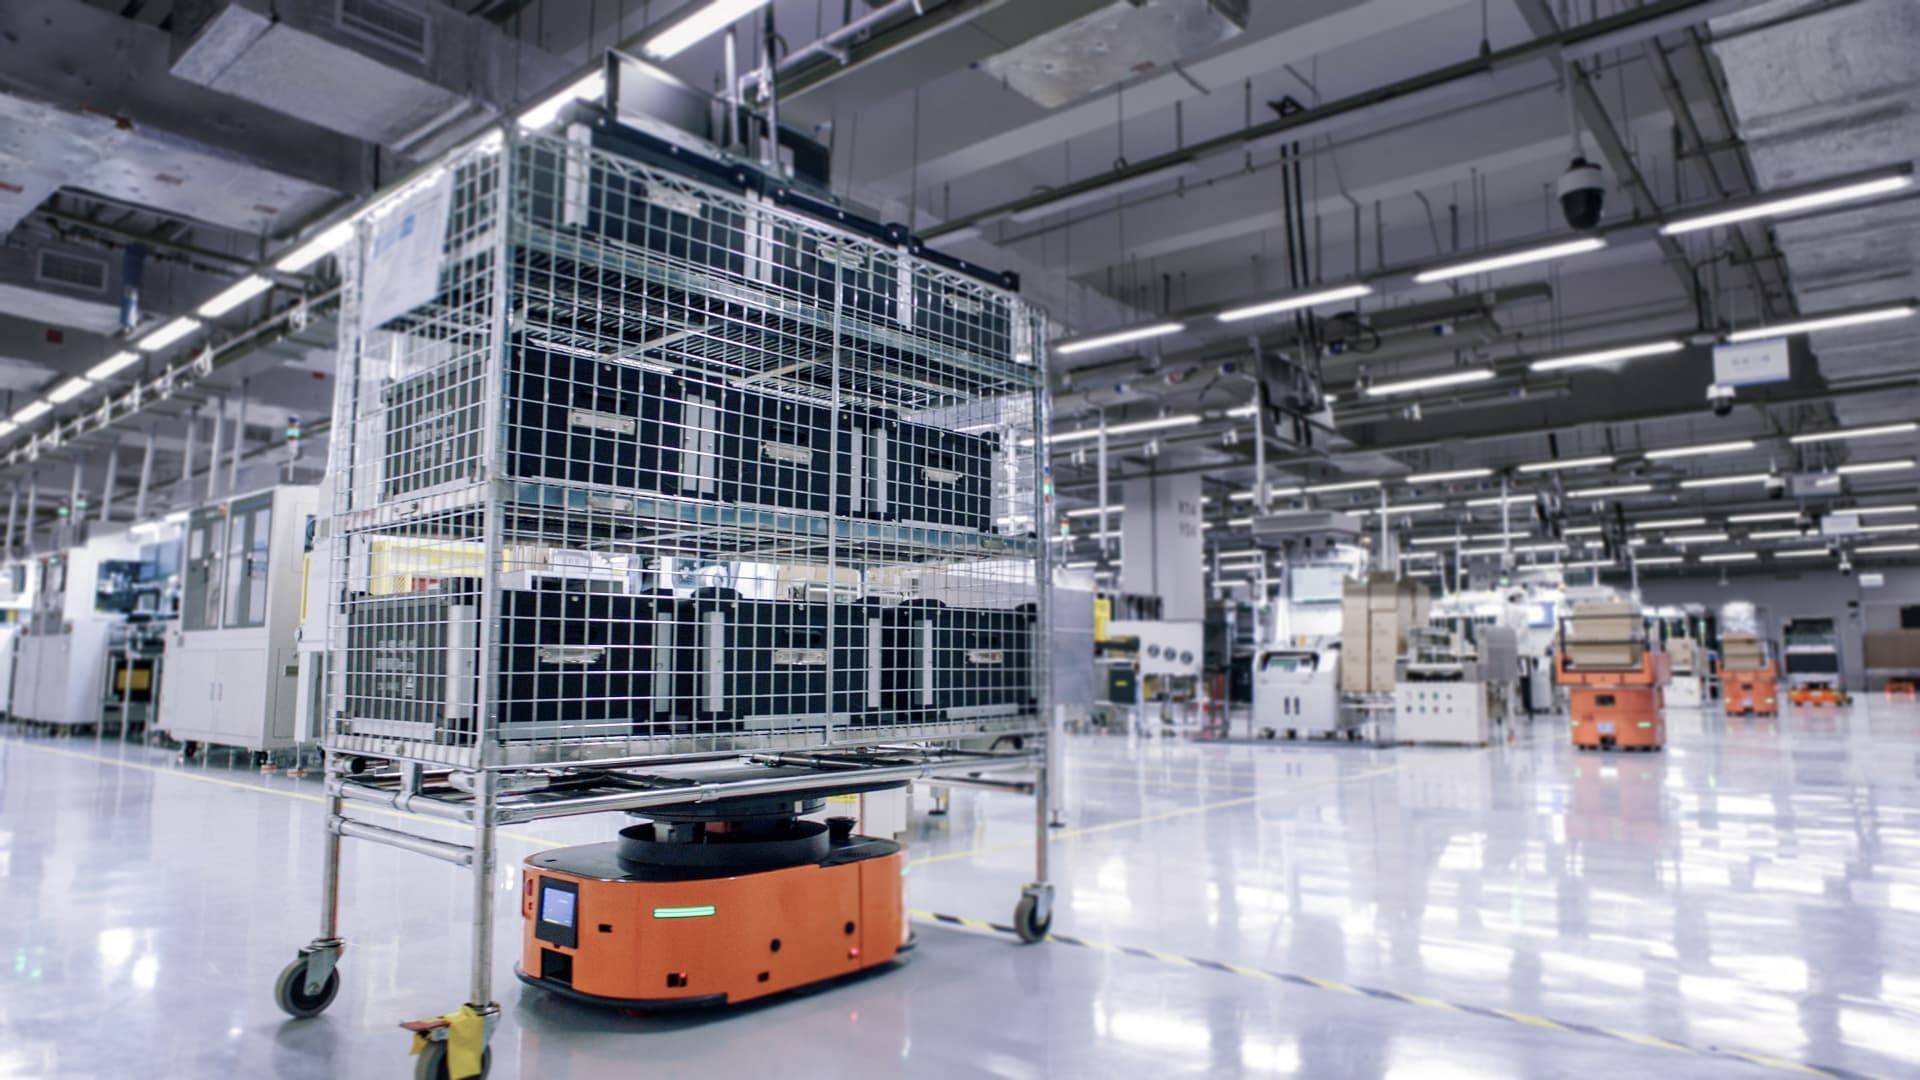 HONOR using Automated Guided Vehicles (AGV) inside its facility